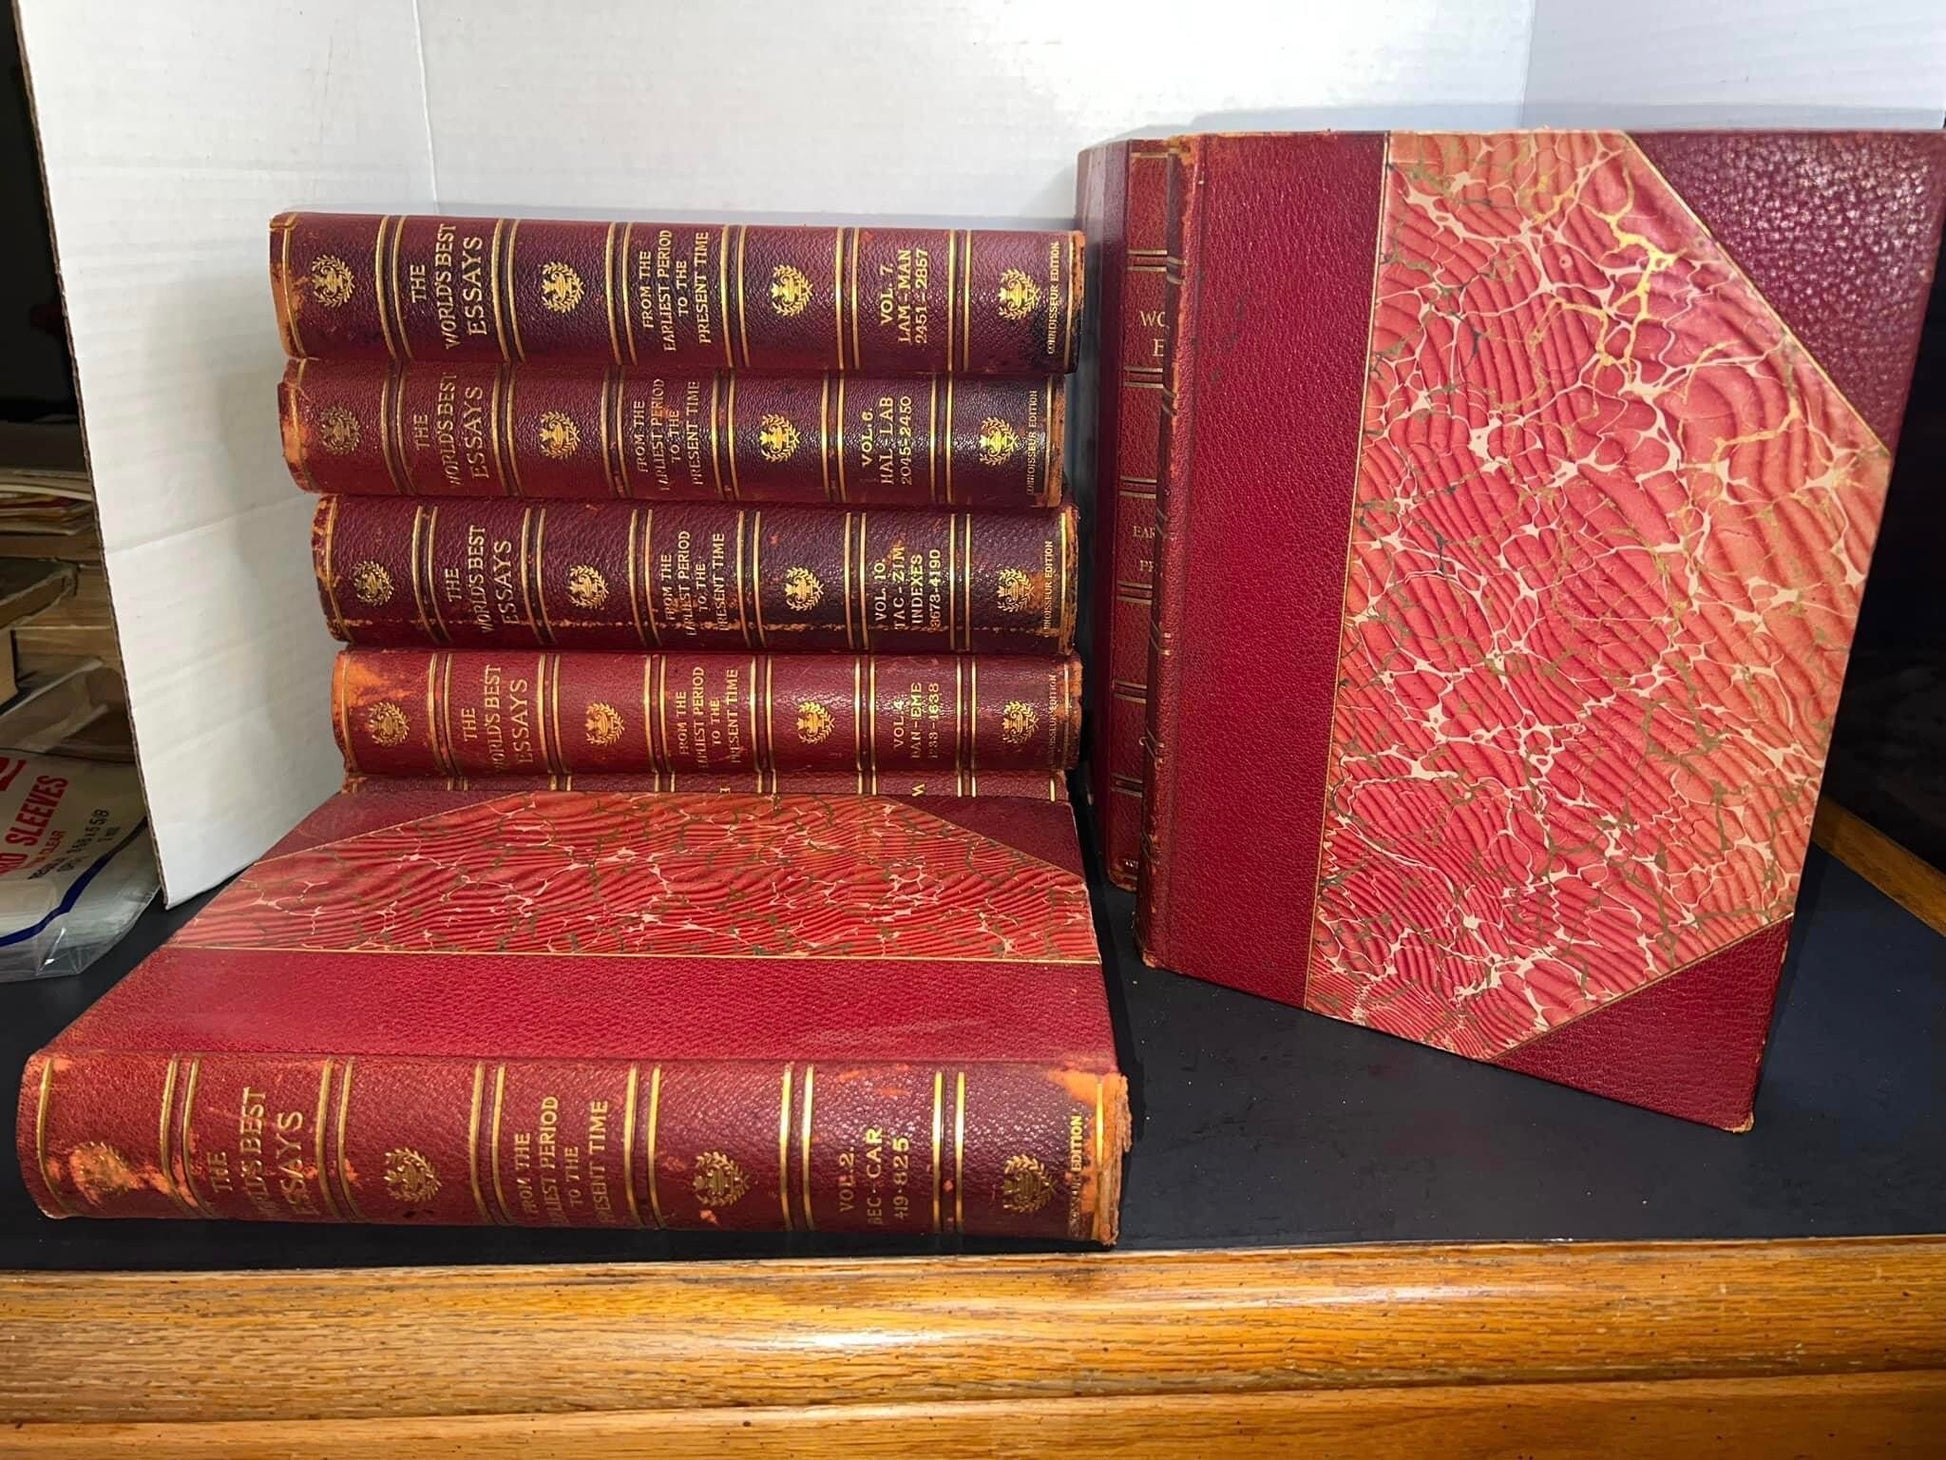 Antique books 1900 The worlds best essays 10 volume set - signed limited edition gorgeous red leather fine binding